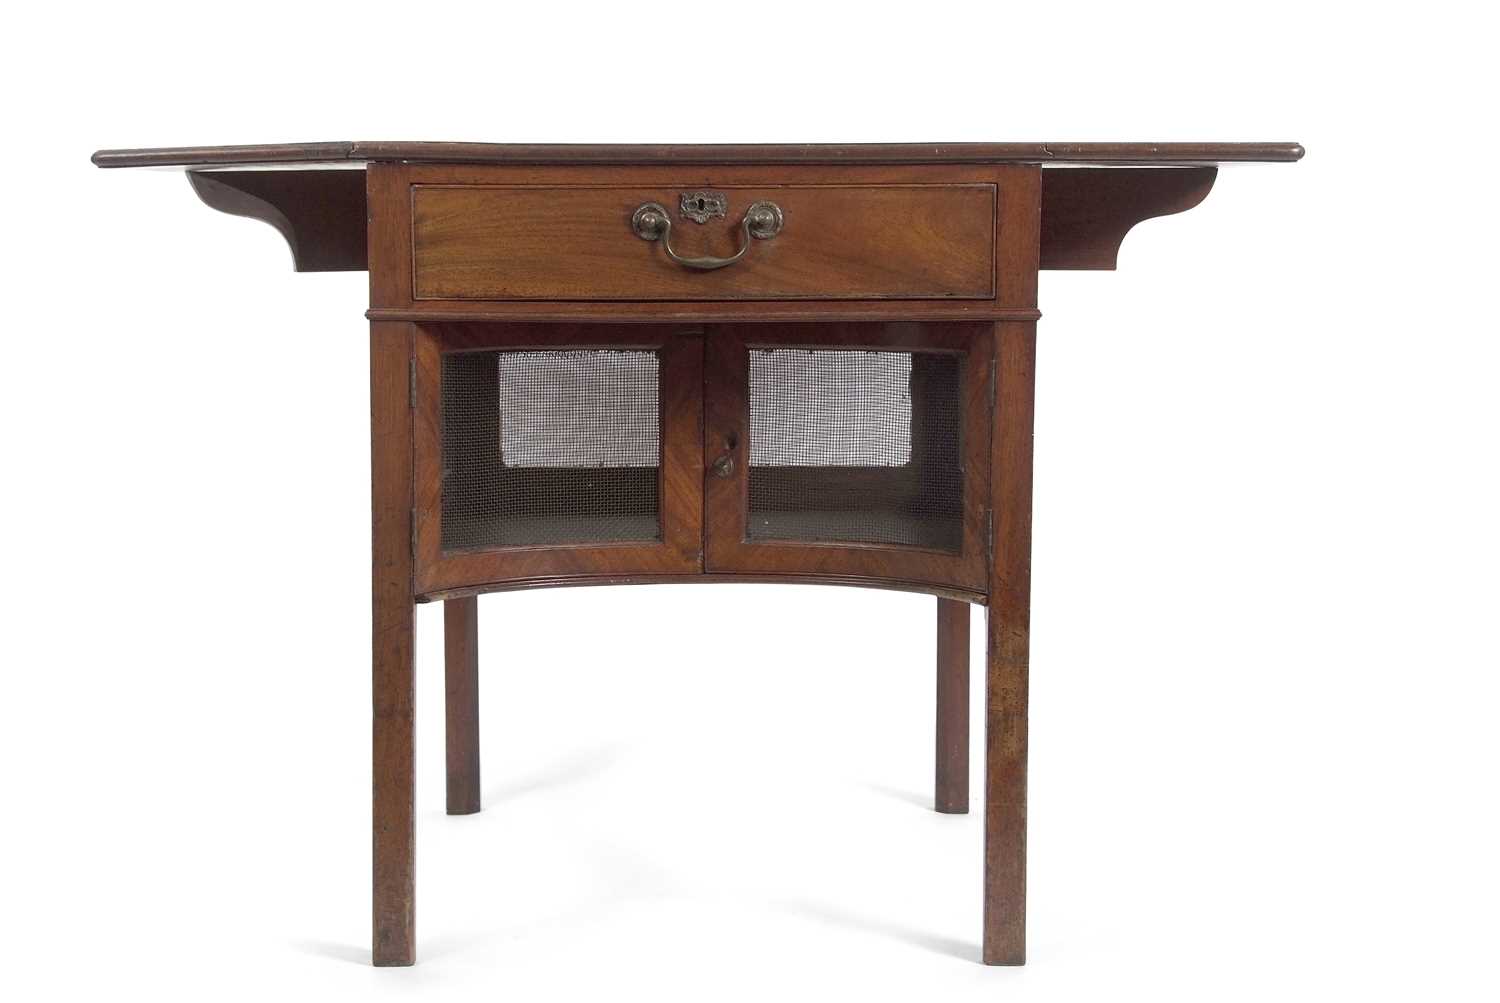 An unusual George III small rectangular drop leaf table with single drawer over a concave under